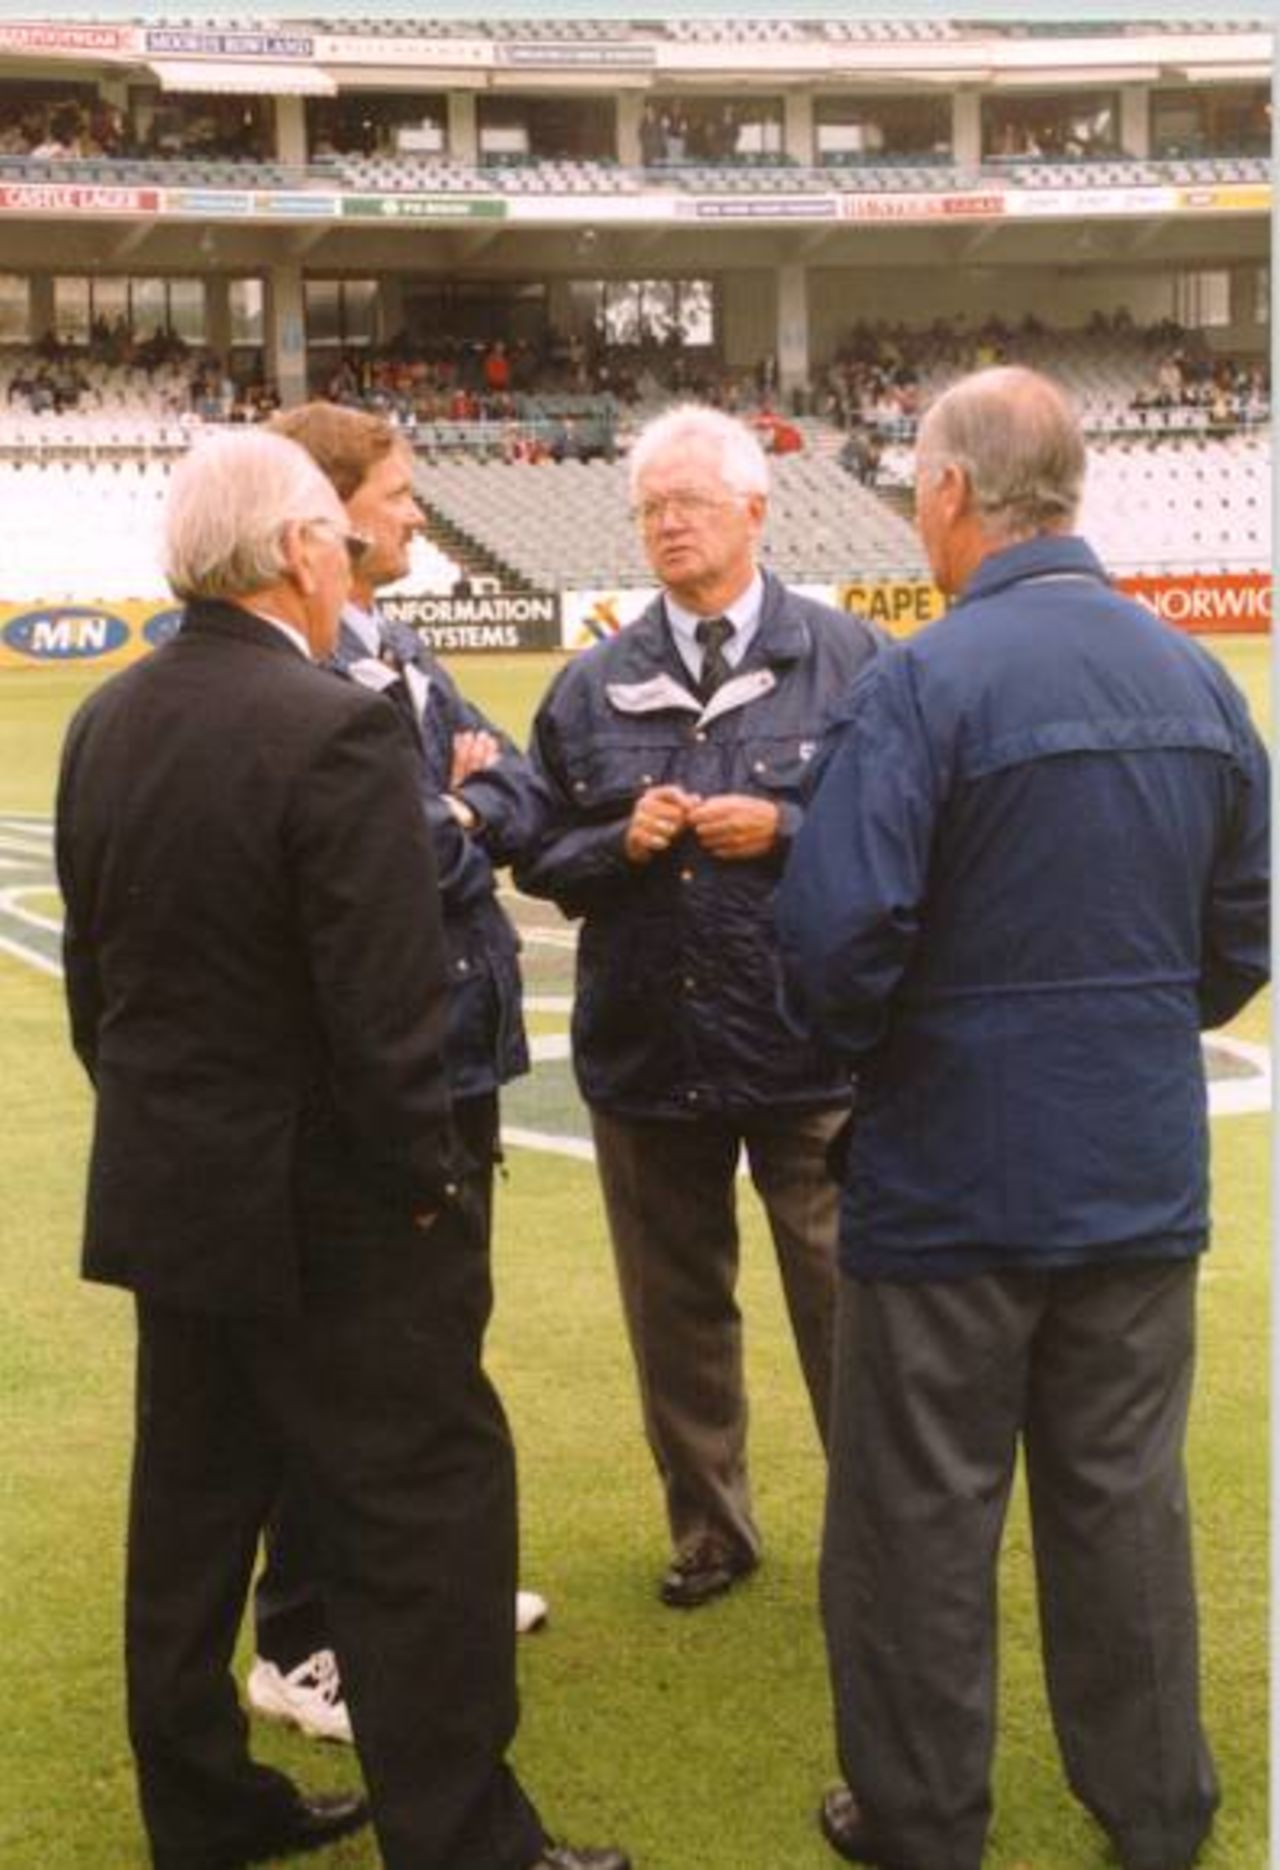 (from left) - Match referee John Reid (New Zealand), 3rd Umpire Rob Brookes with match umpires Cyril Mitchelly and Rudy Kroetzen. Standard Bank tournament final, abandoned game on 22 April 1998 at Newlands, Cape Town SA.